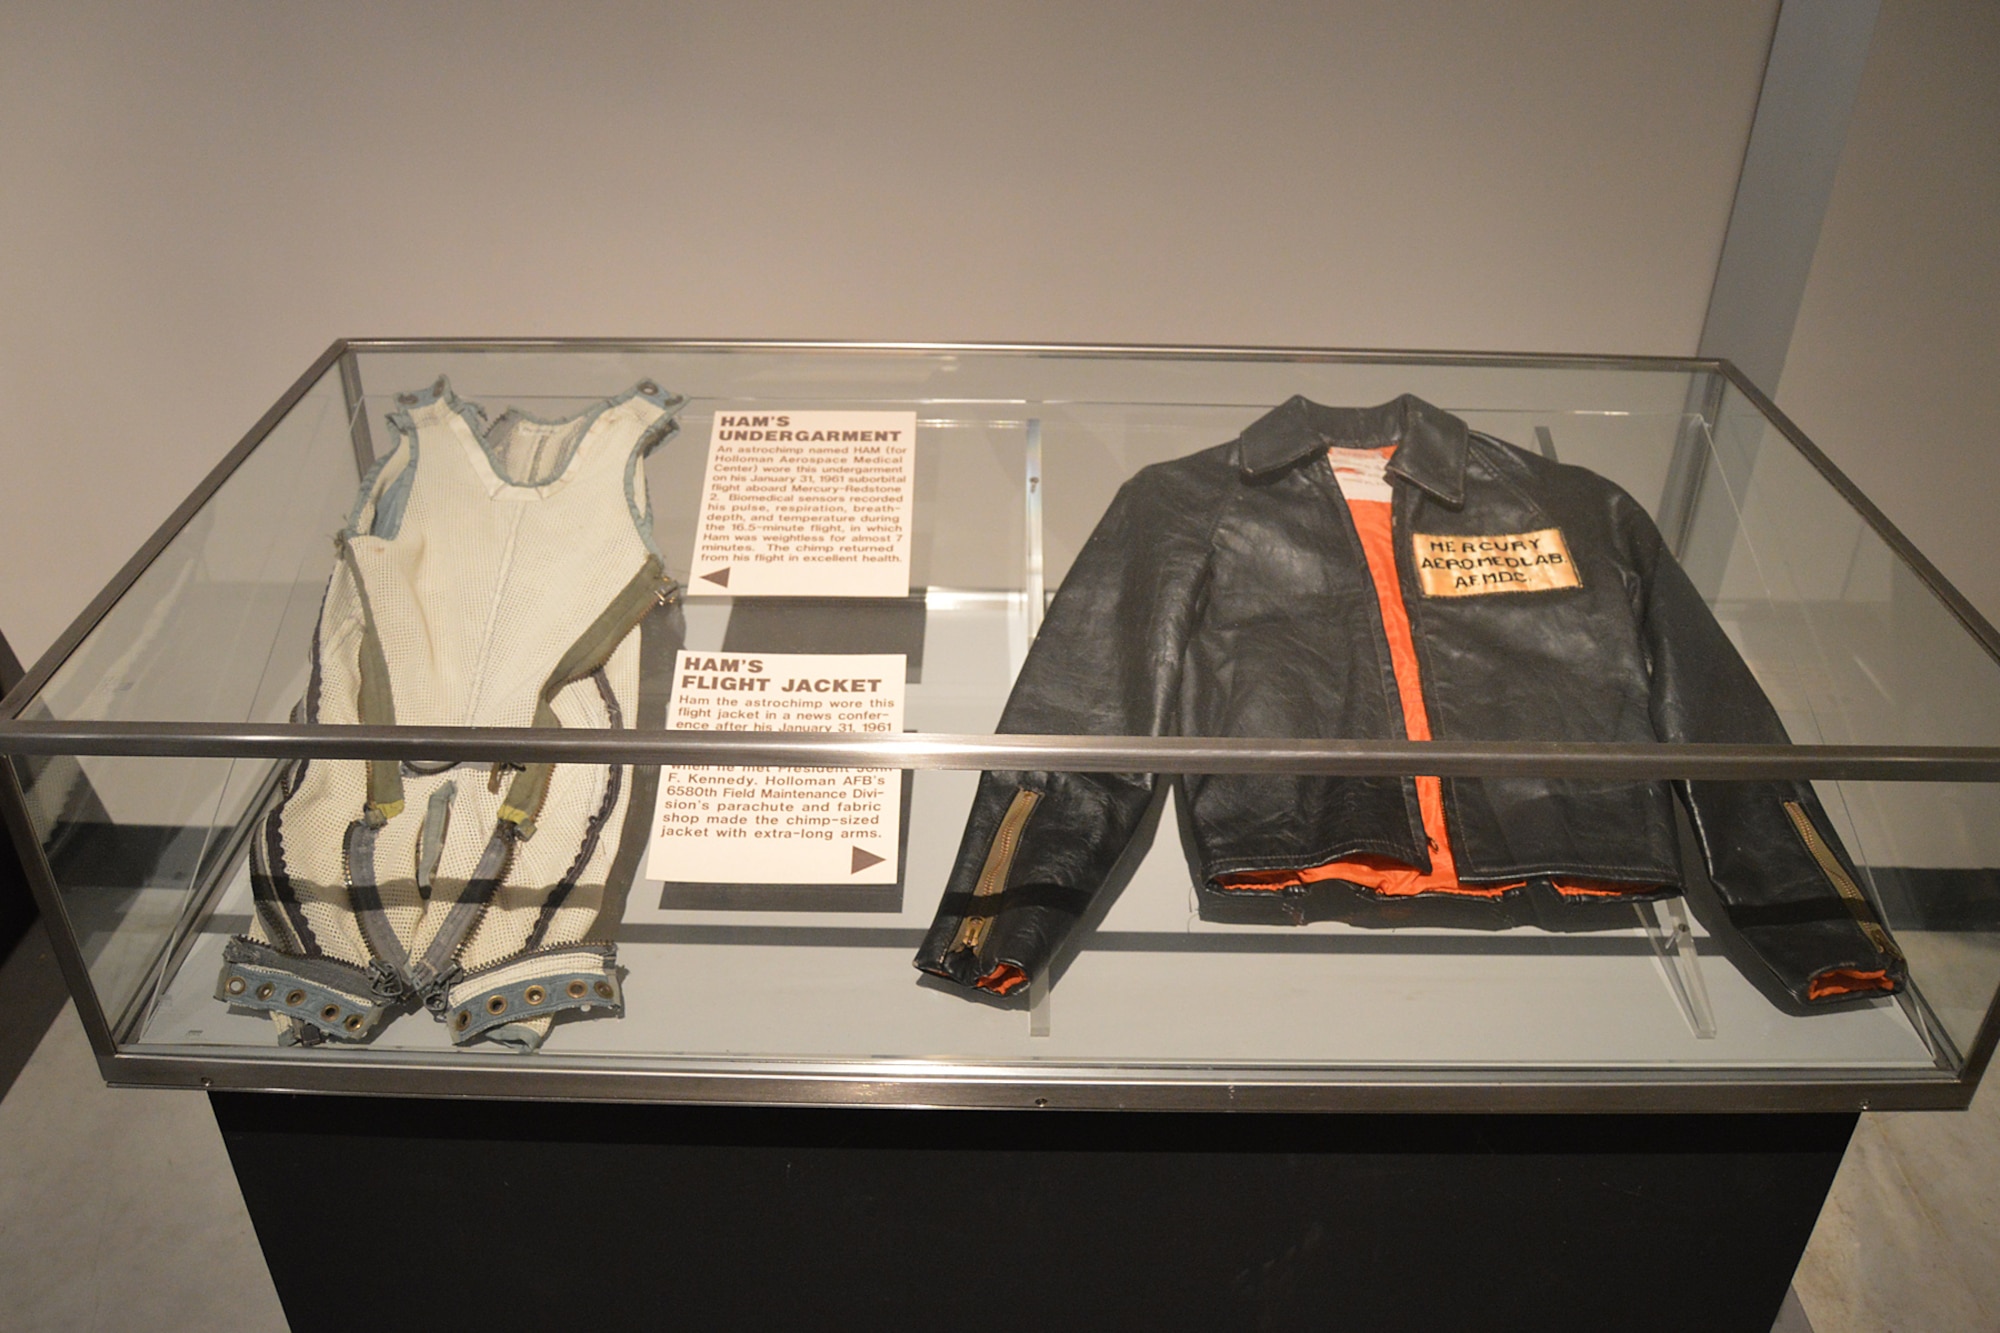 DAYTON, Ohio - HAM's undergarment and flight jacket on display in the Missile & Space Gallery at the National Museum of the U.S. Air Force. (U.S. Air Force photo)